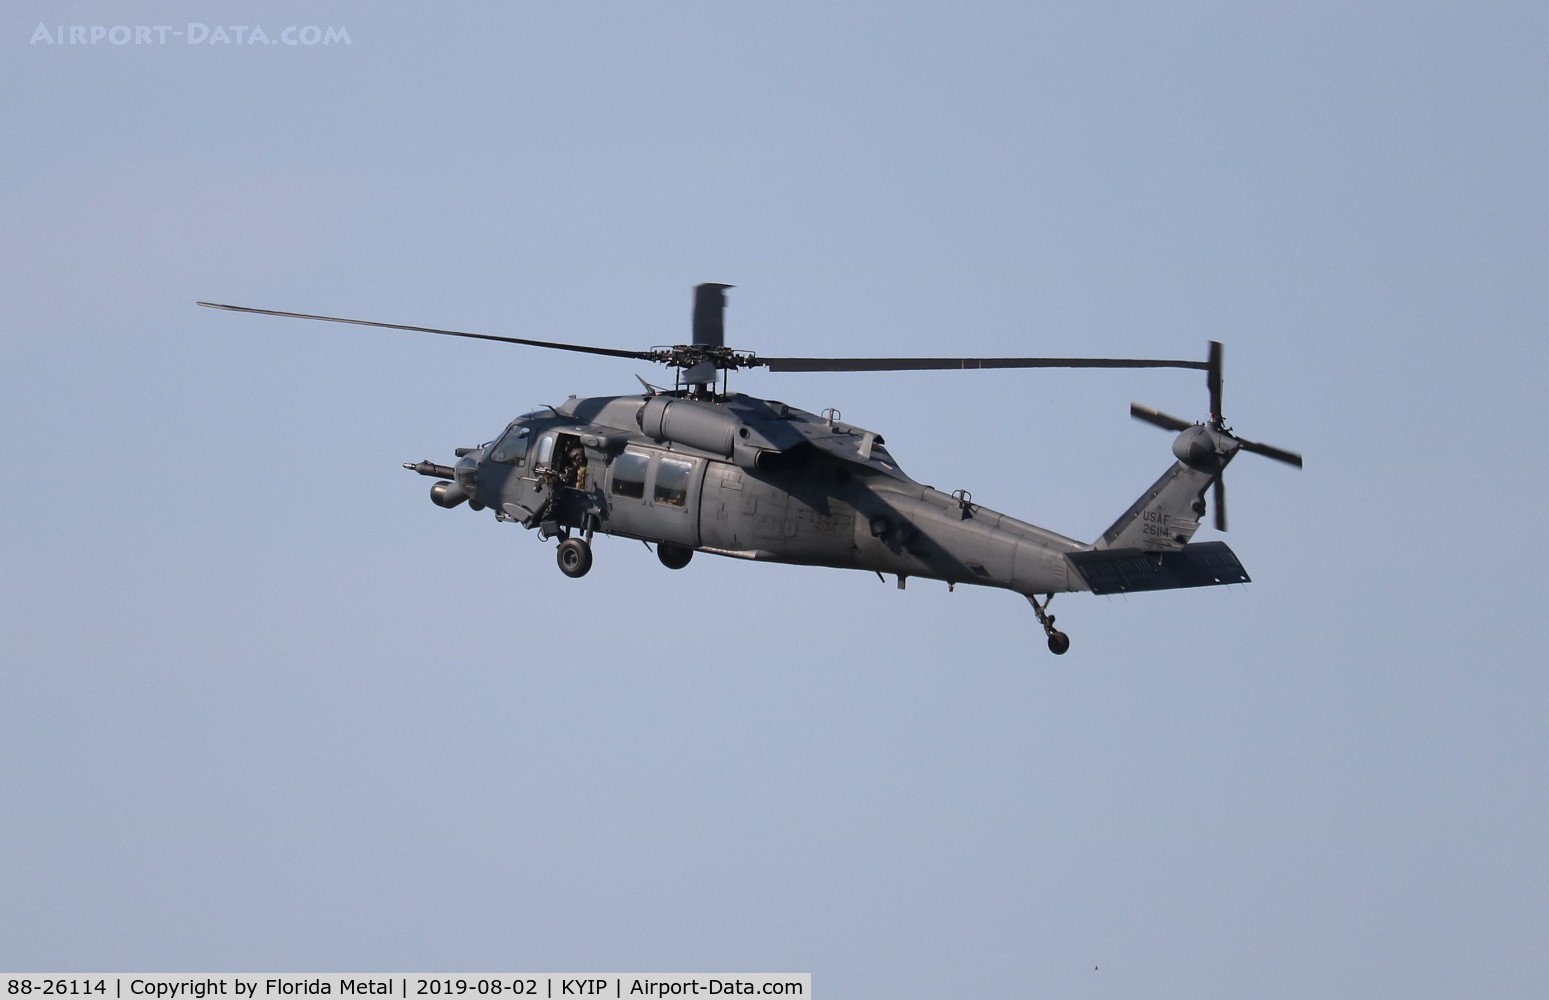 88-26114, 1986 Sikorsky HH-60G Pave Hawk C/N 70.1311, Thunder Over Michigan 2019